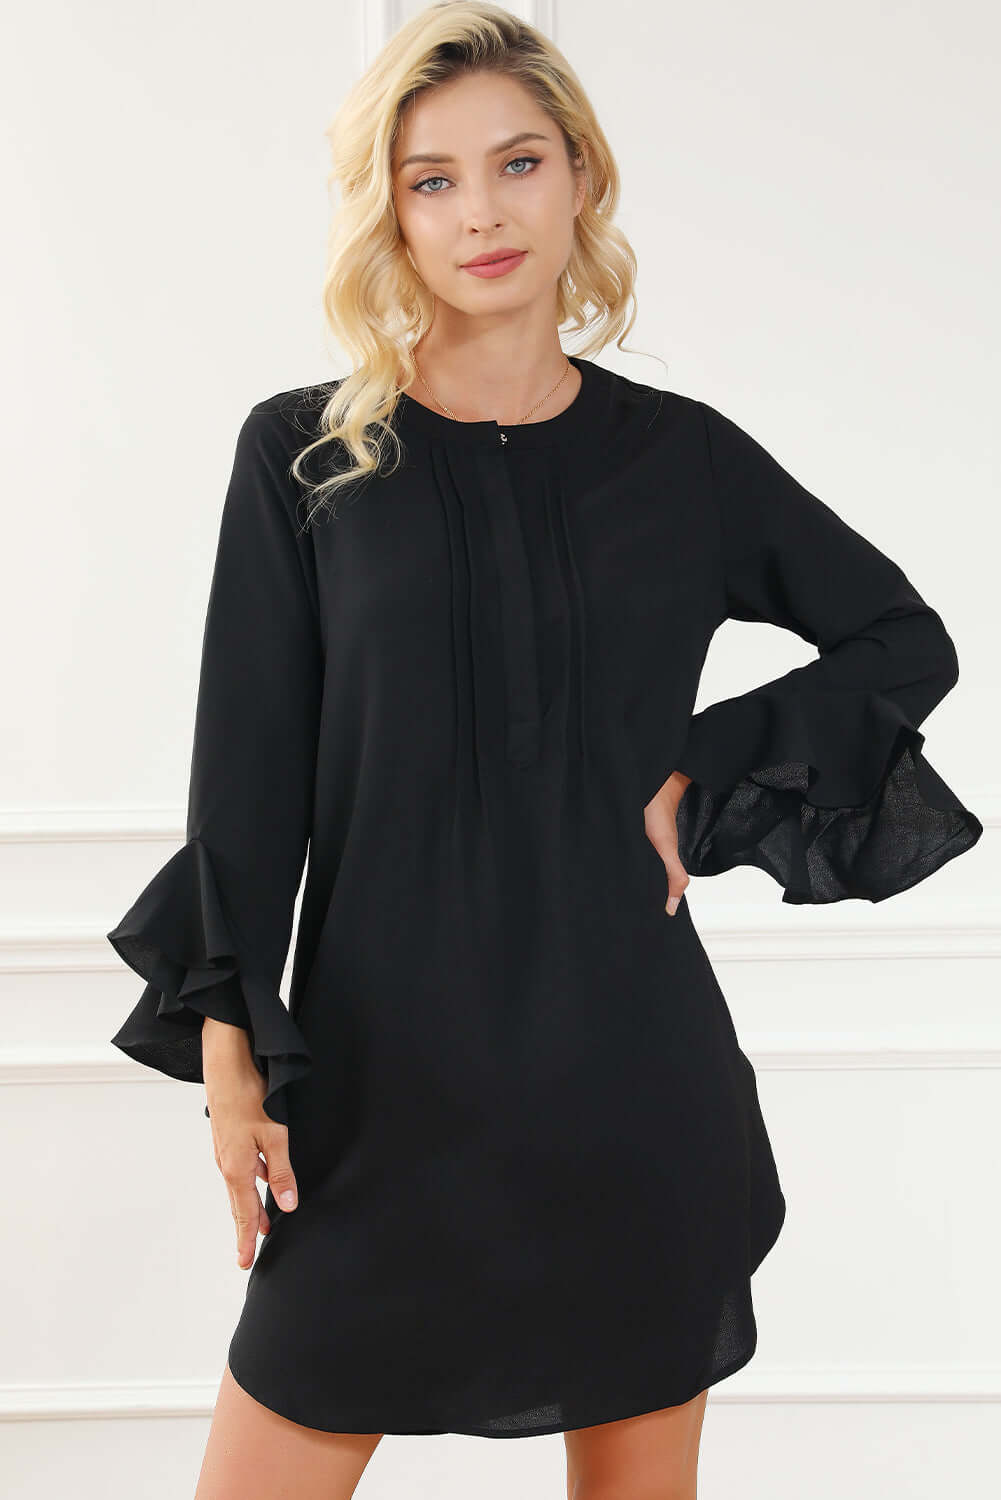 Black Solid Color Flounce Splicing Sleeve Mini Shift Dress - Dixie Hike & Style